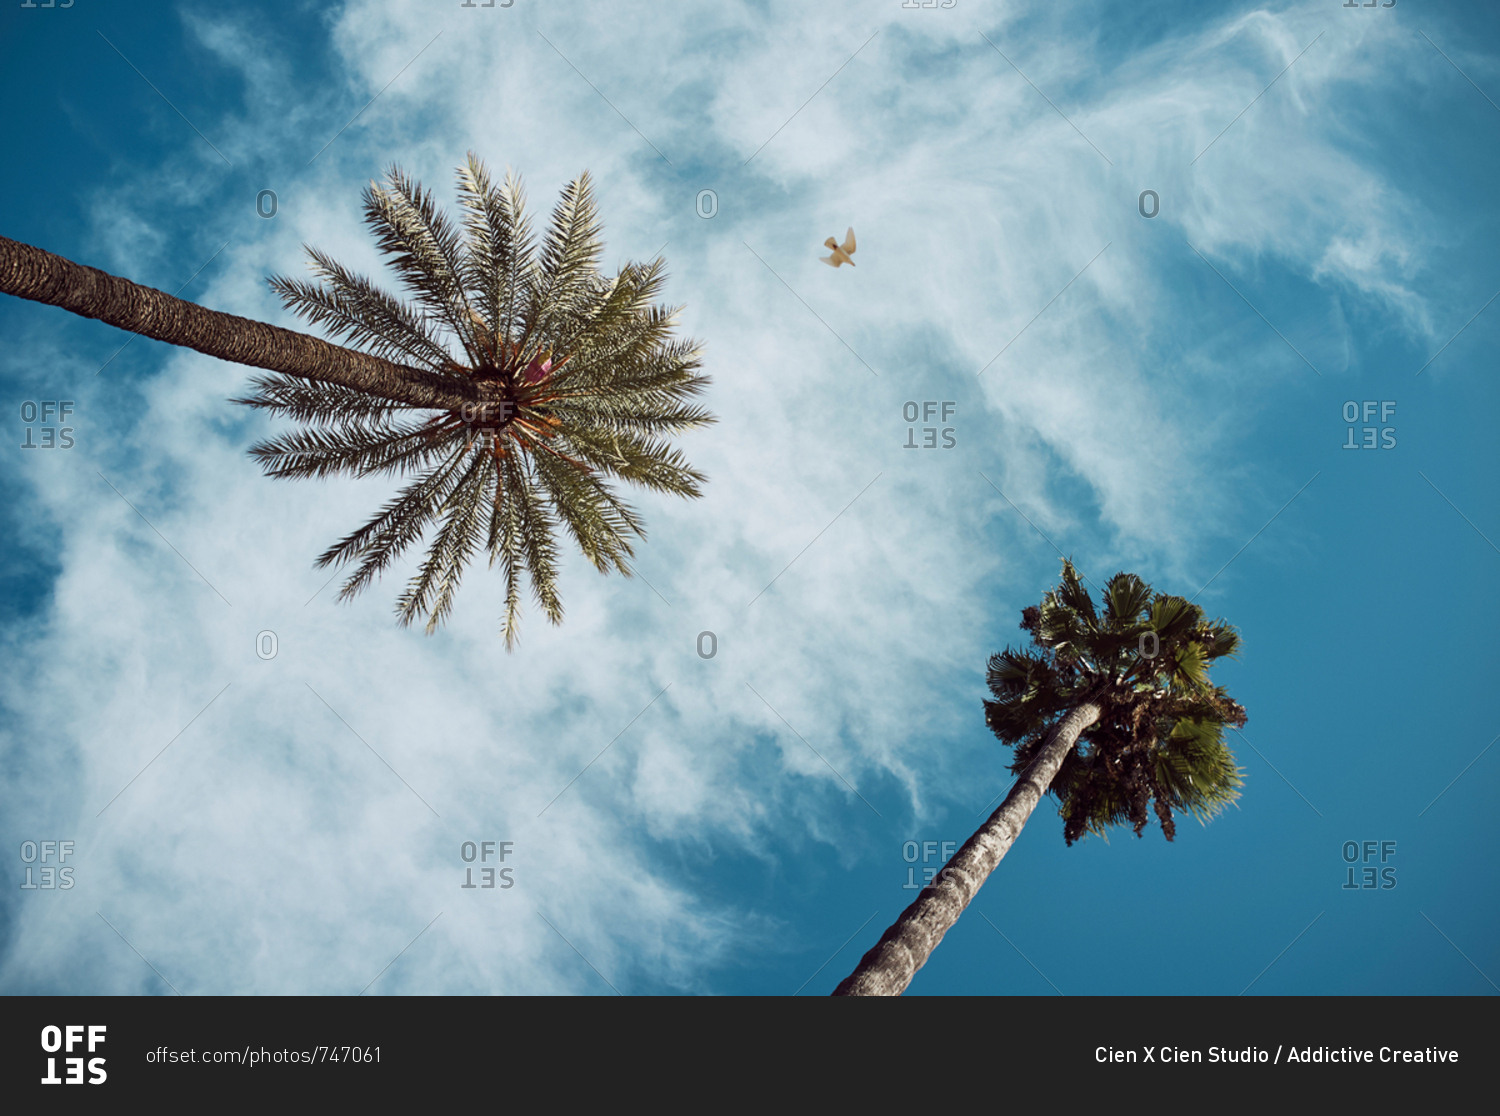 From below view of high tropical palms on background of blue cloudy sky